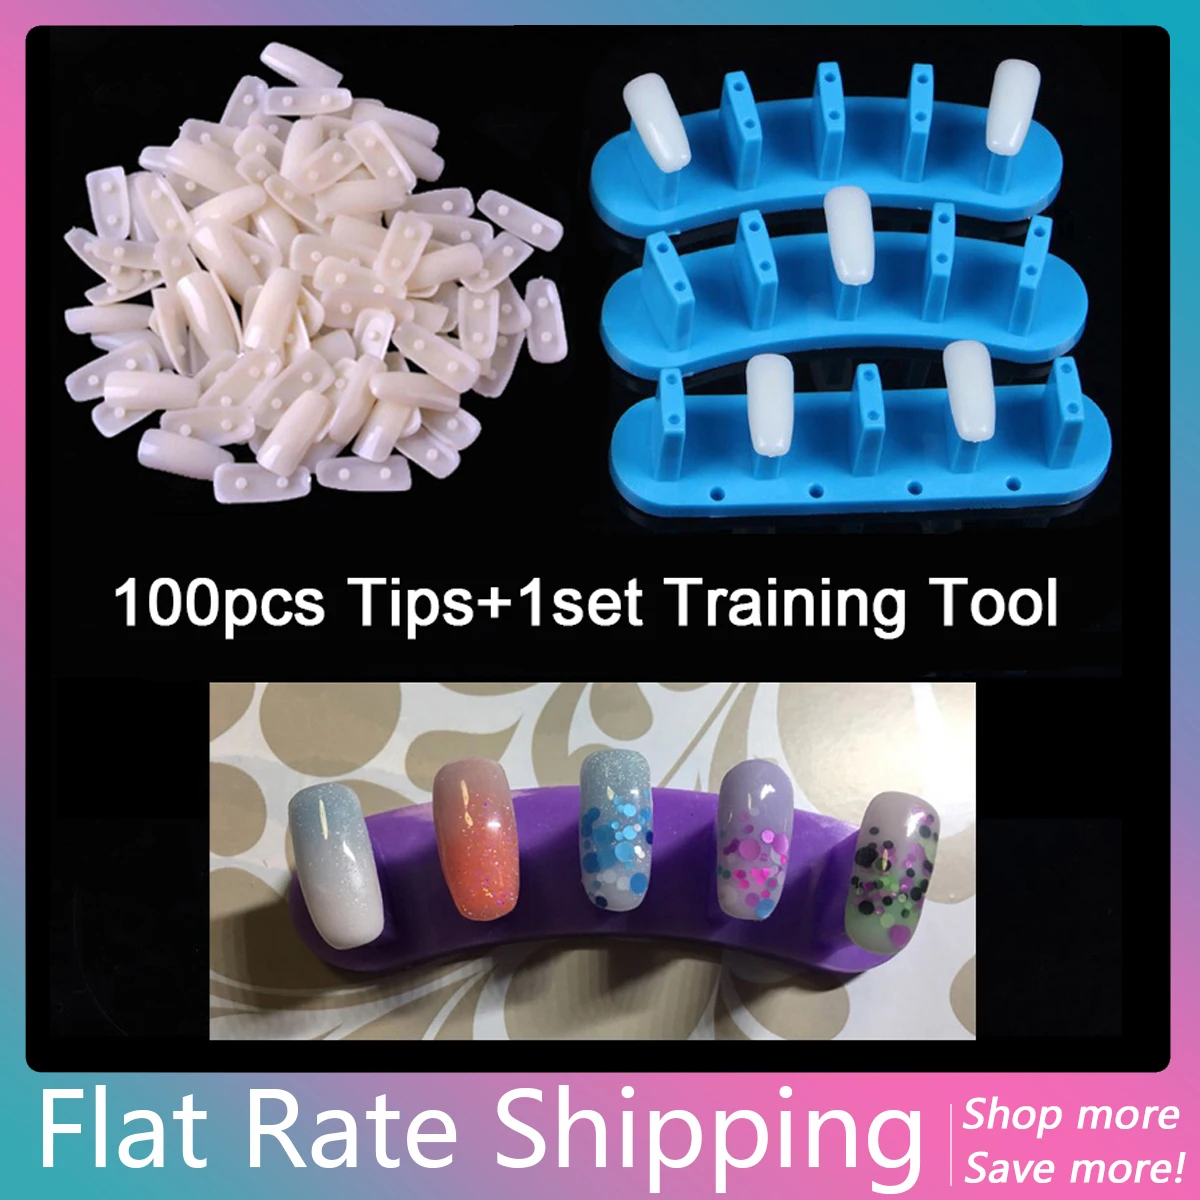 Flat Rate Shipping 100 Pcs Square Nail Tips Trainer Practice Tool Adjustable Nail Art Model Hand Practice +1 Set Display